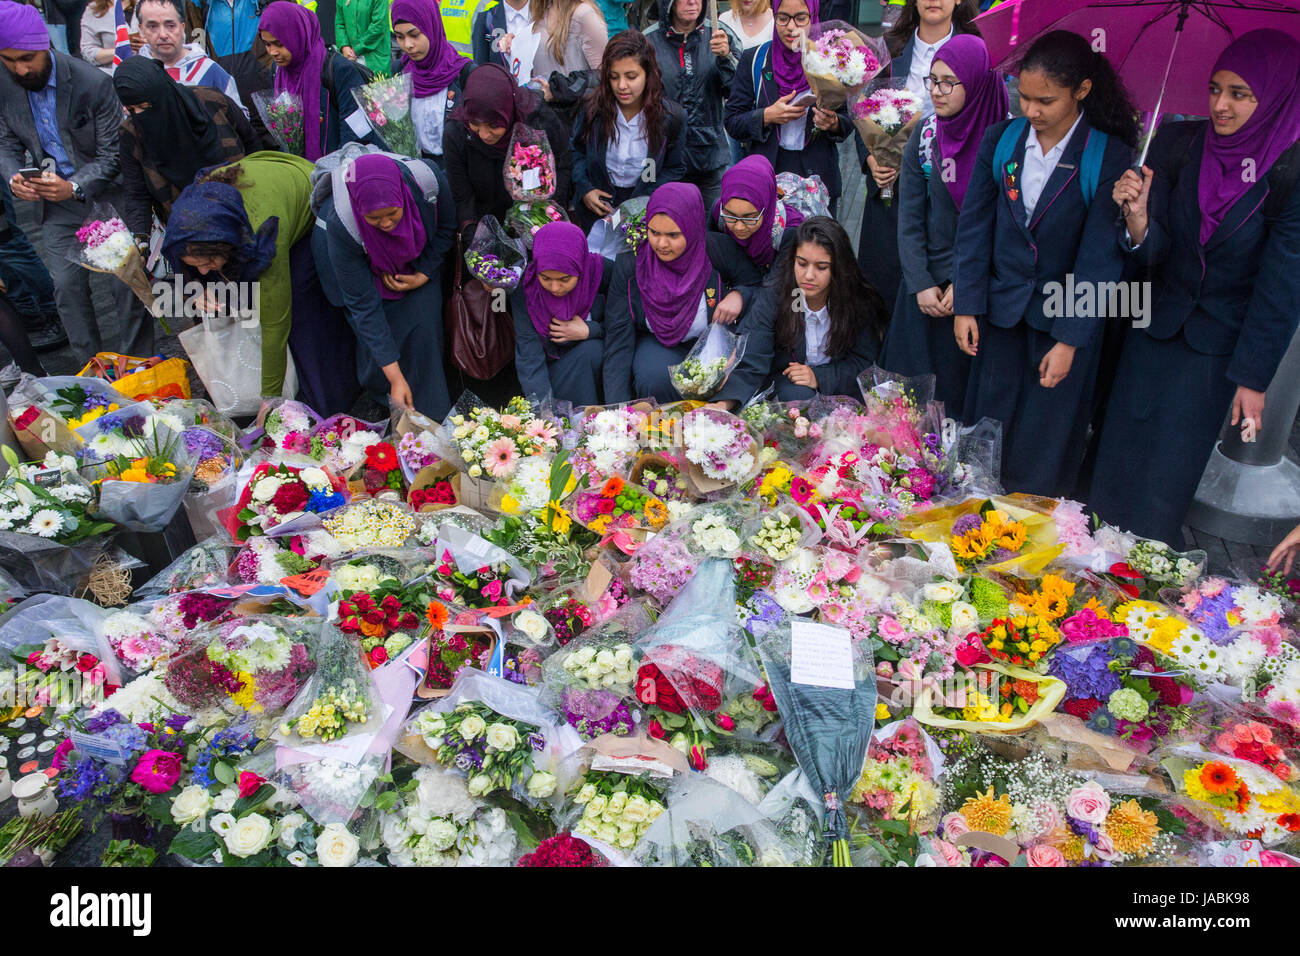 Children laying flowers at the vigil outside City Hall in memory of those who lost their lives and were injured during the attacks at London Bridge. Stock Photo